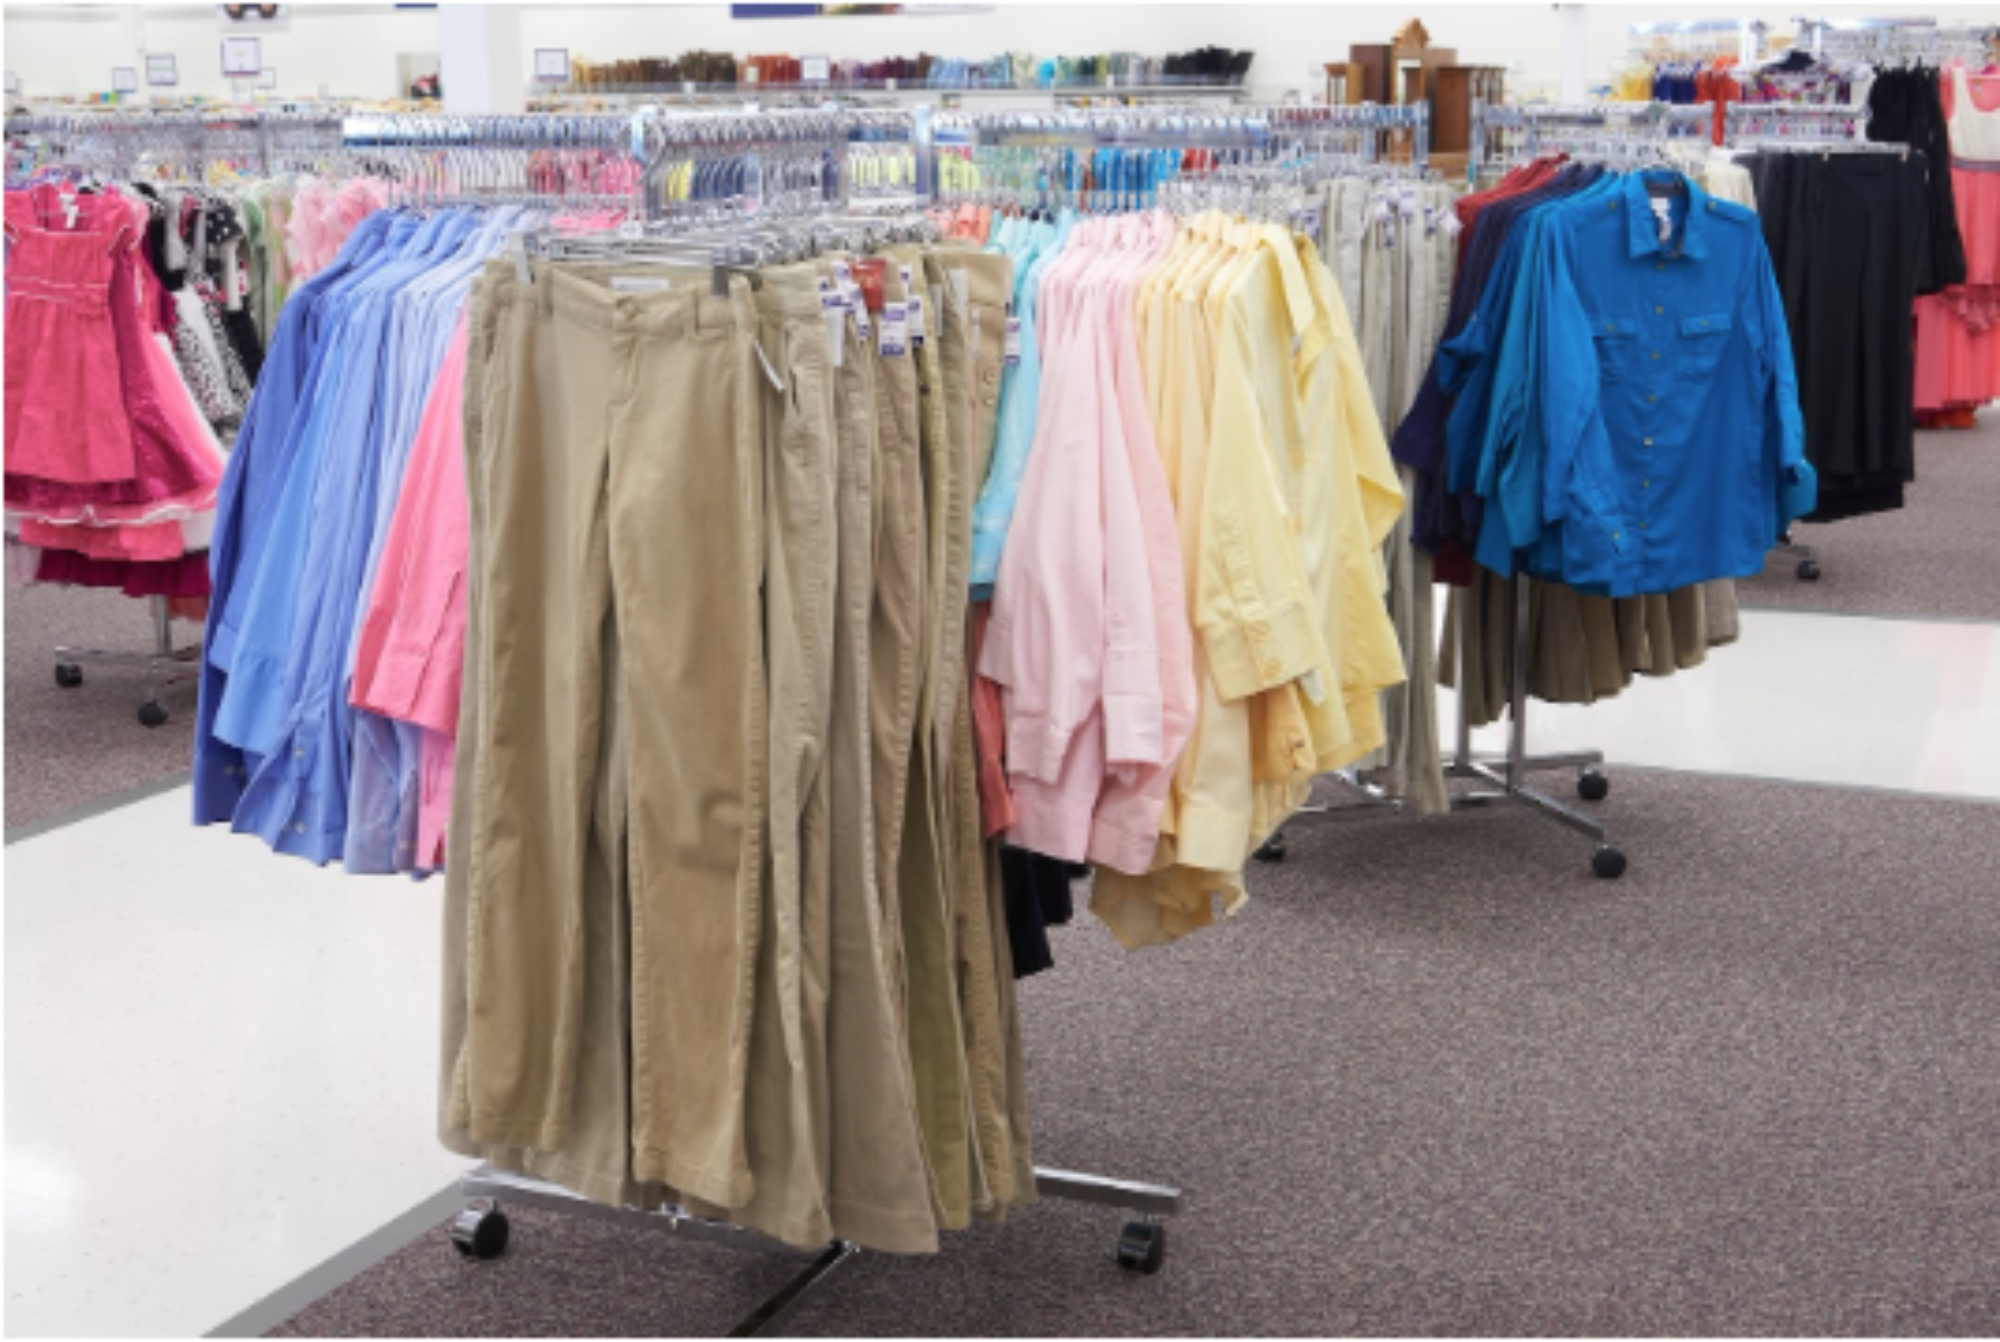 Image of clothes in the store. hanging in the clothing racks